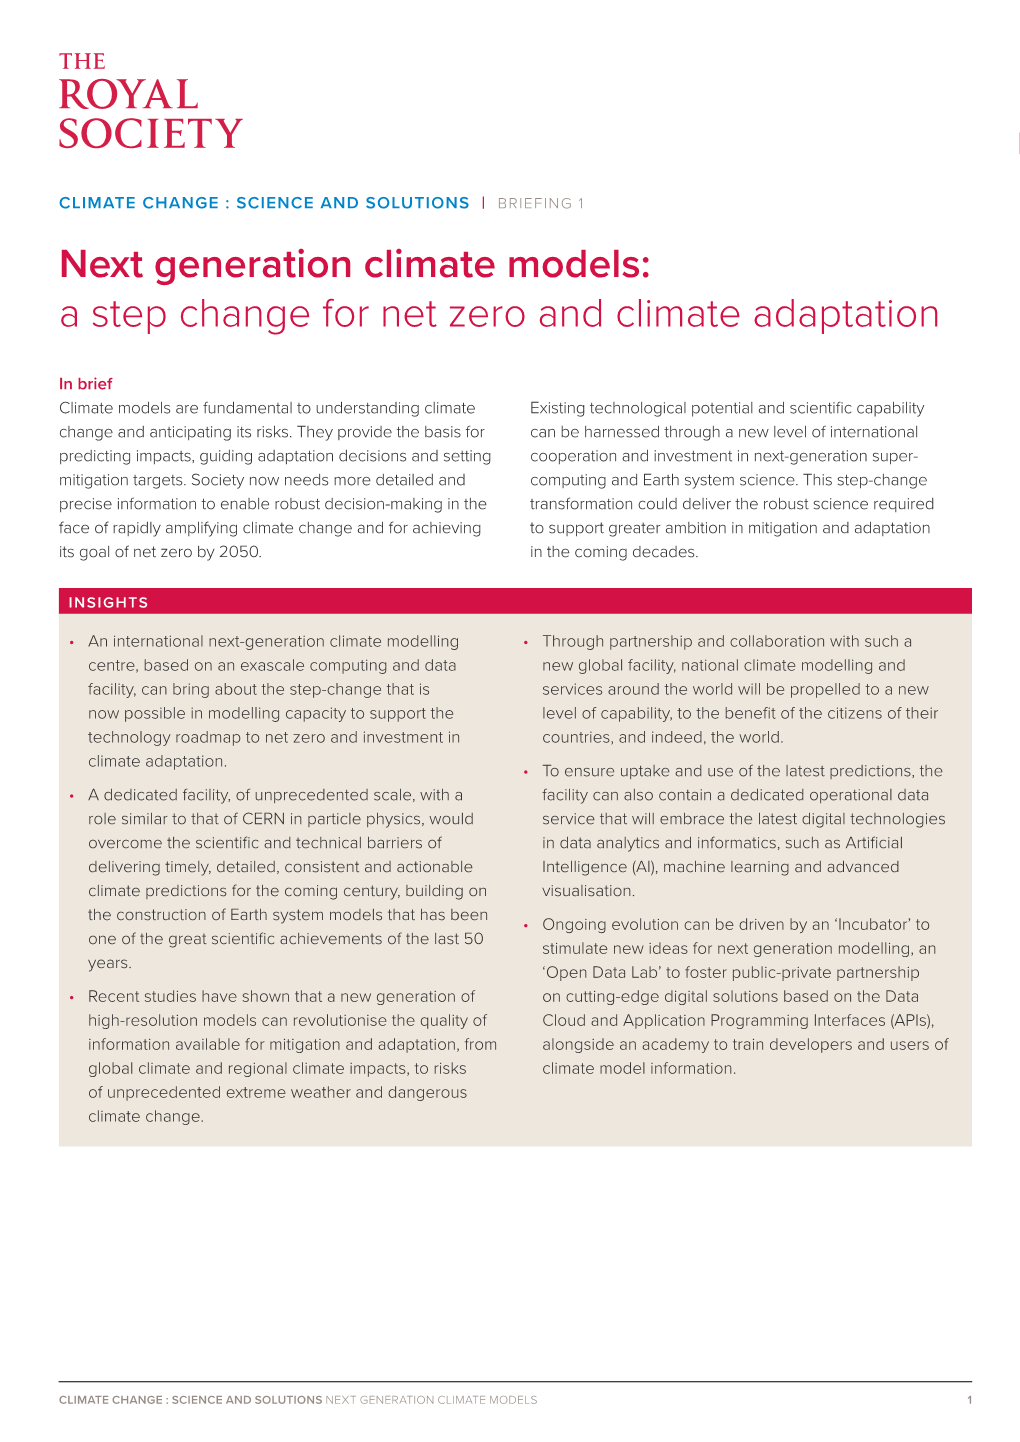 Next Generation Climate Models: a Step Change for Net Zero and Climate Adaptation